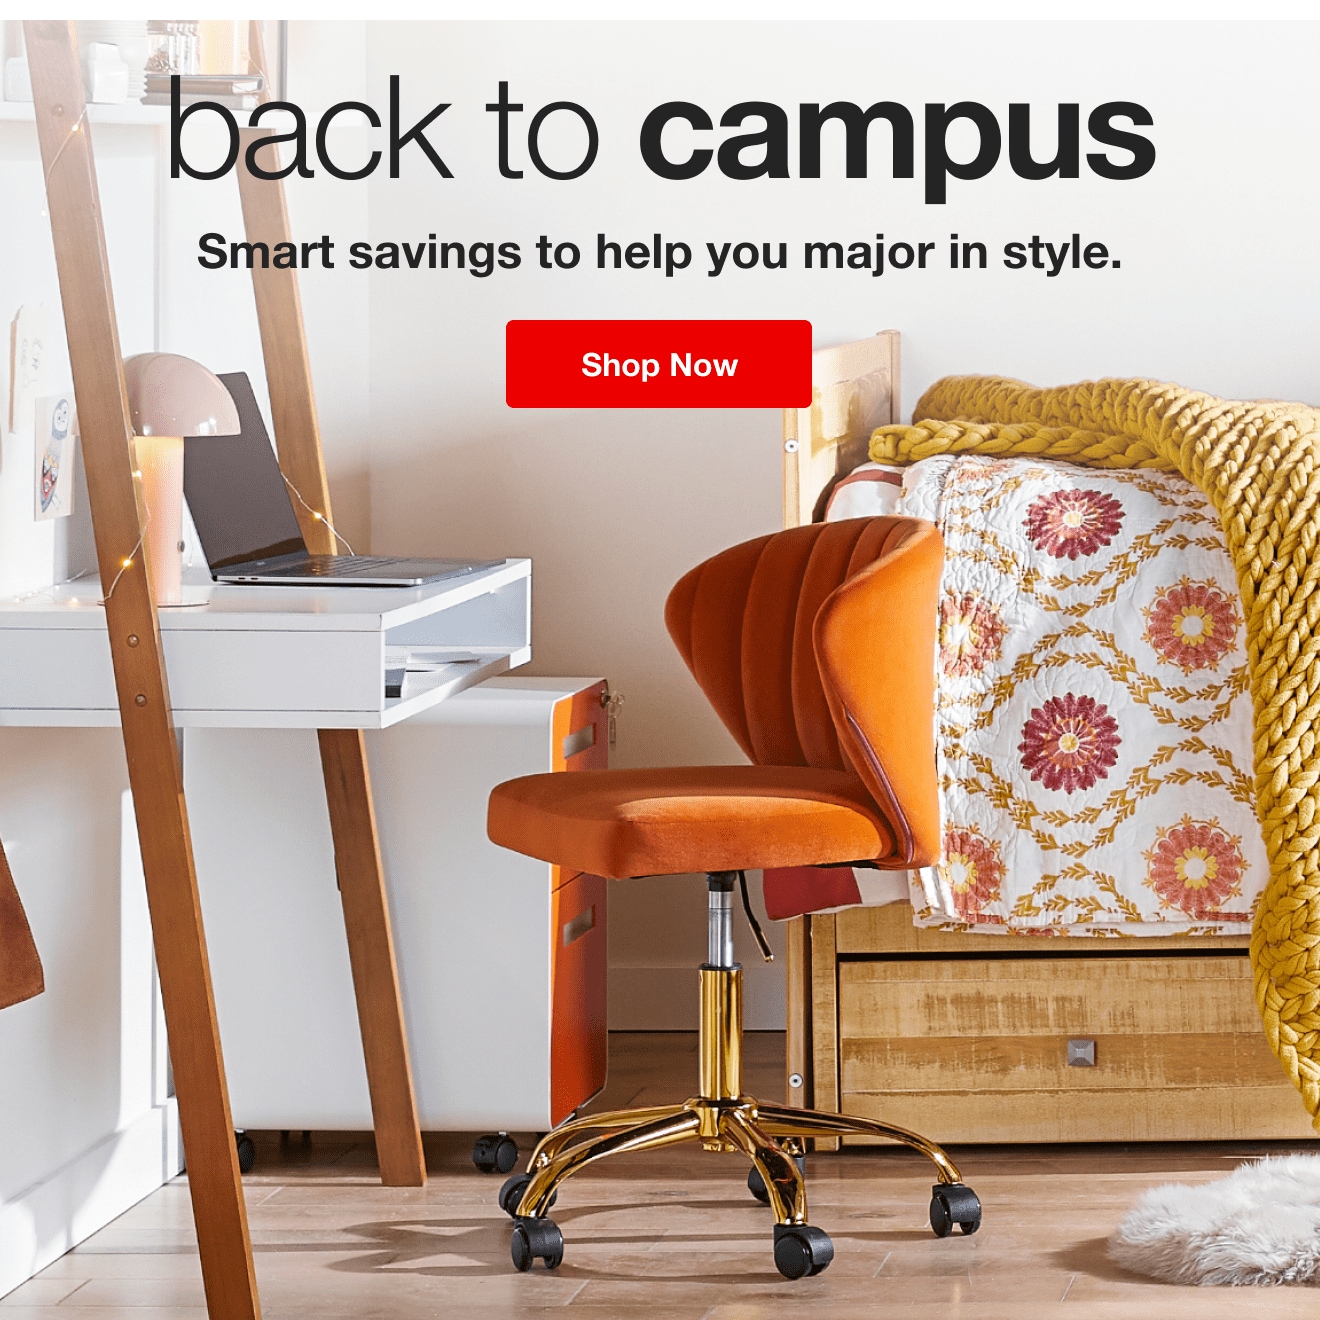 Back to Campus! Shop Now!